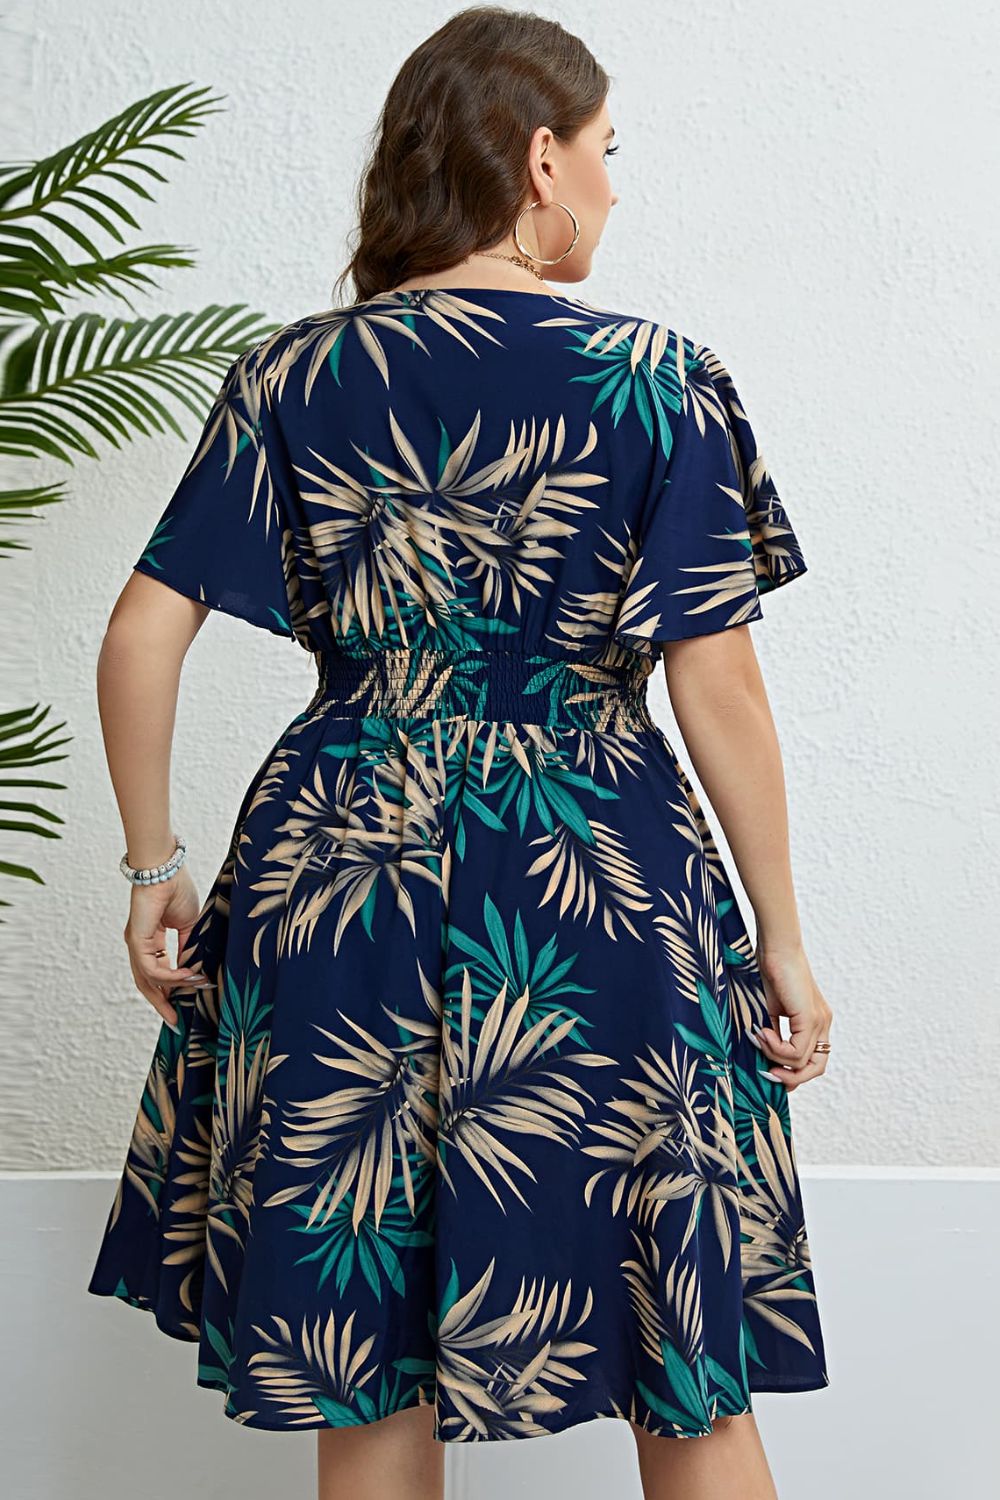 Tropical Plus Size Resort Dress up to 4XL Perfect Tropical Dress